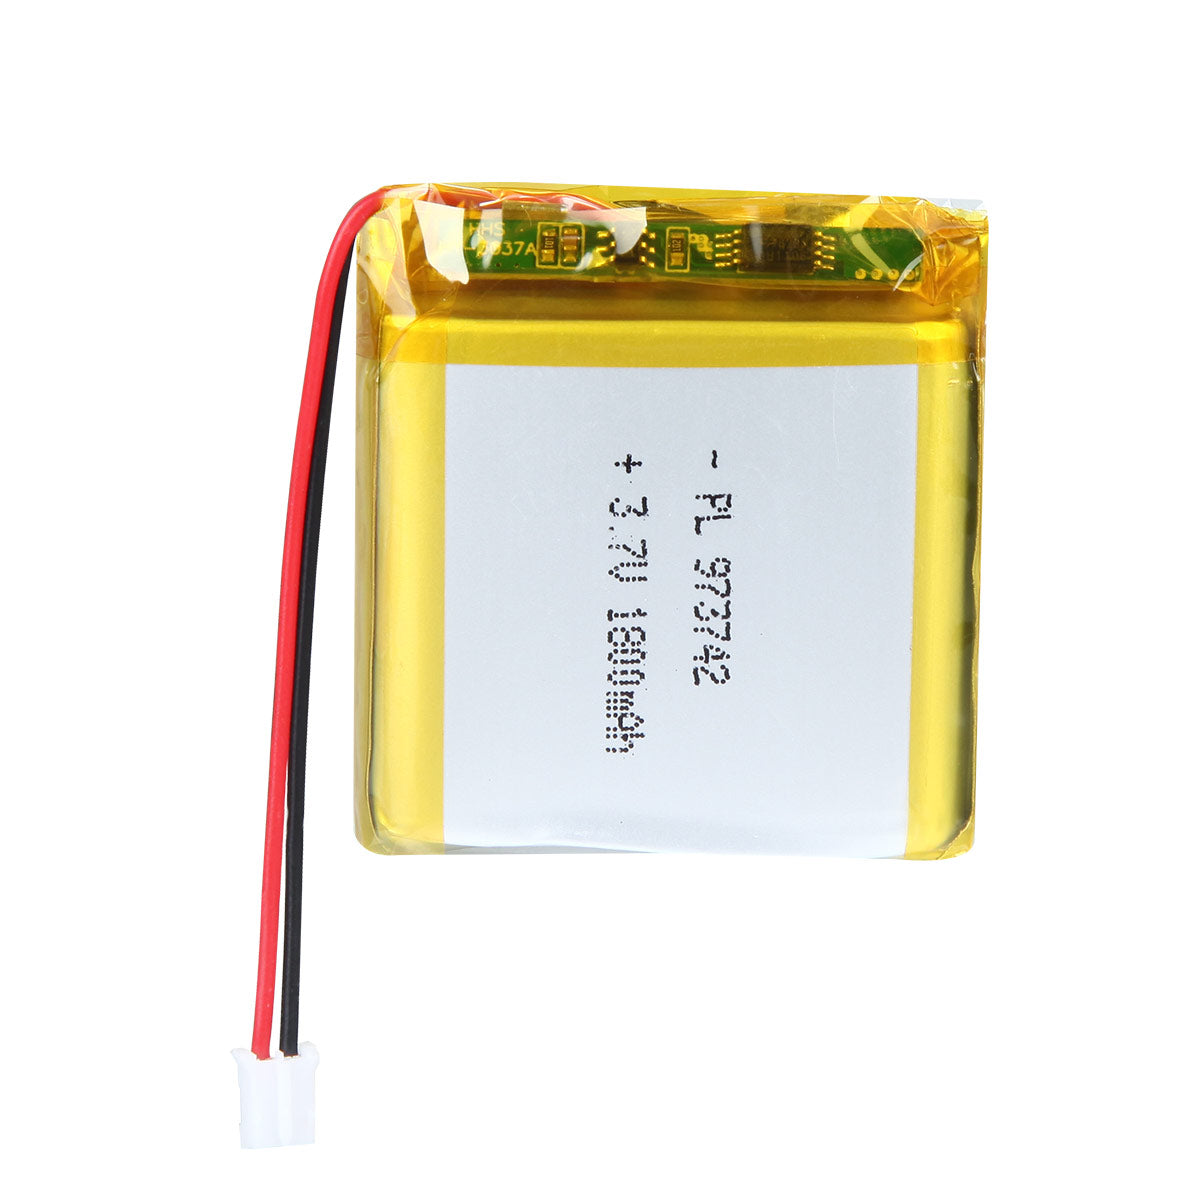 YDL 3.7V 1800mAh 973742 Rechargeable Lithium Polymer Battery Length 44mm